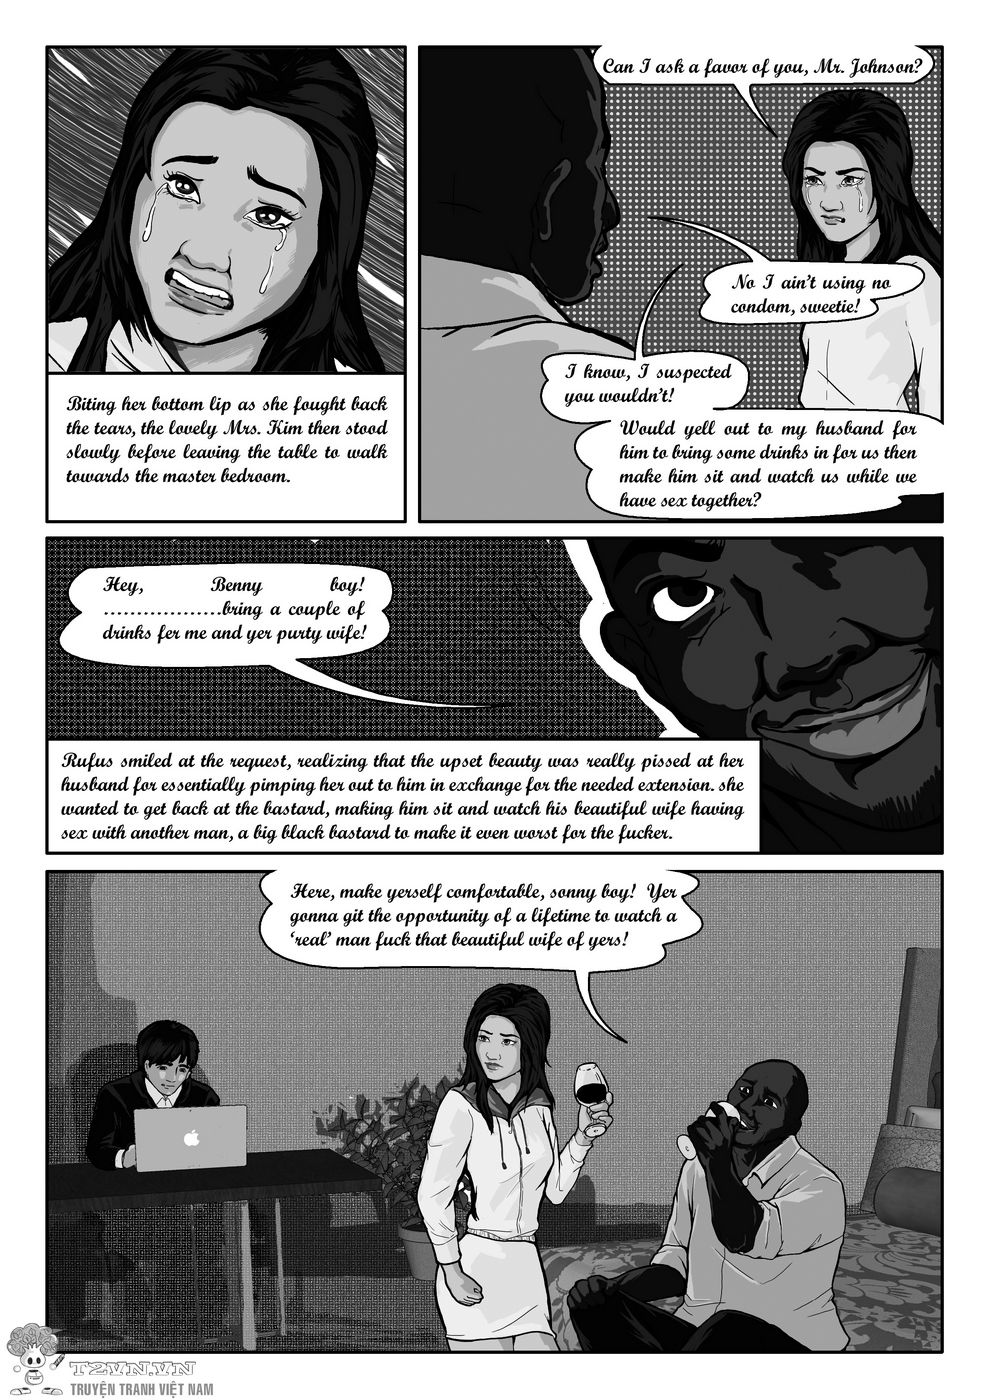 Forced Into Foreclosure - Paro Gide page 4